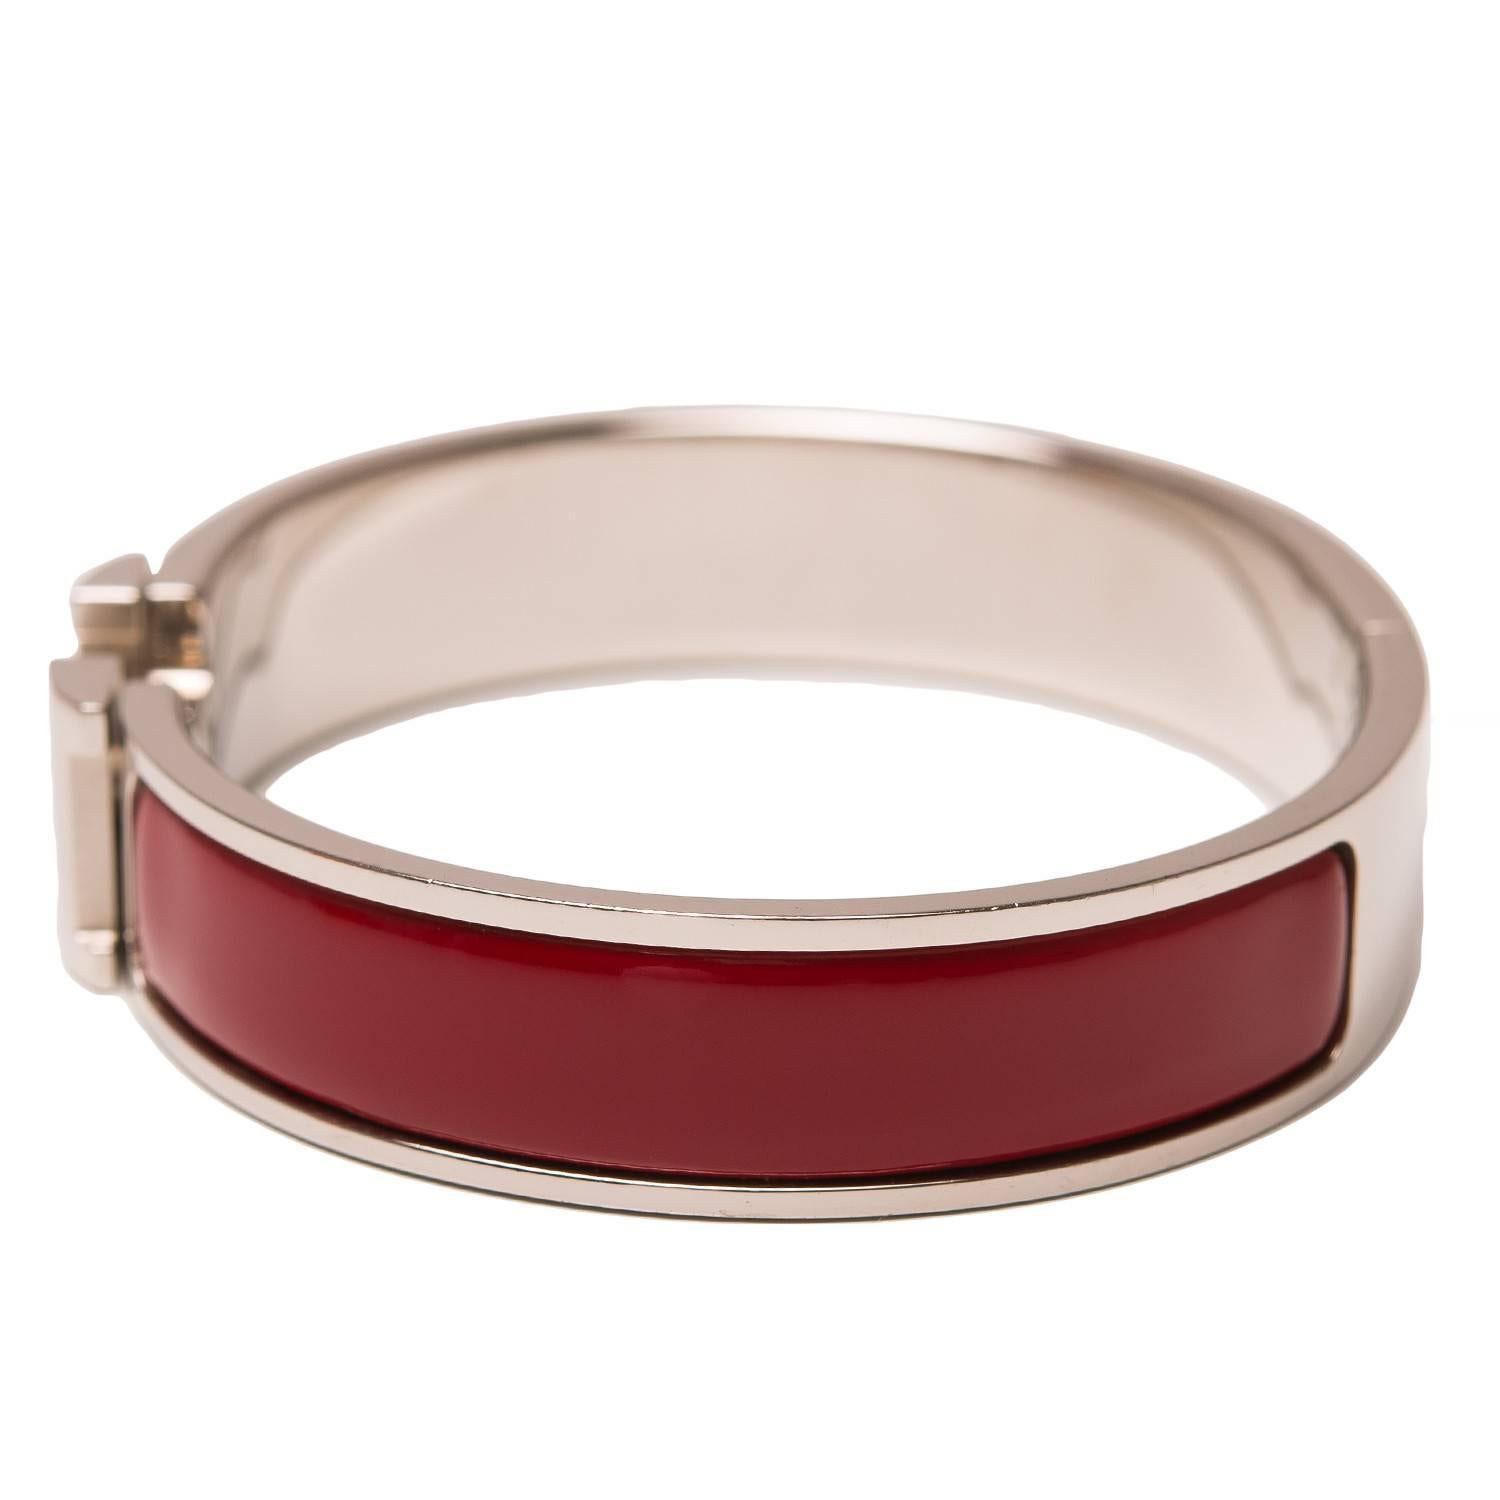 Hermes narrow Clic Clac H bracelet in burgundy enamel with palladium plated hardware in size PM.

Origin: France

Condition: Mint

Accompanied by: Hermes box, dustbag and carebook

Measurements: Diameter: 2.25